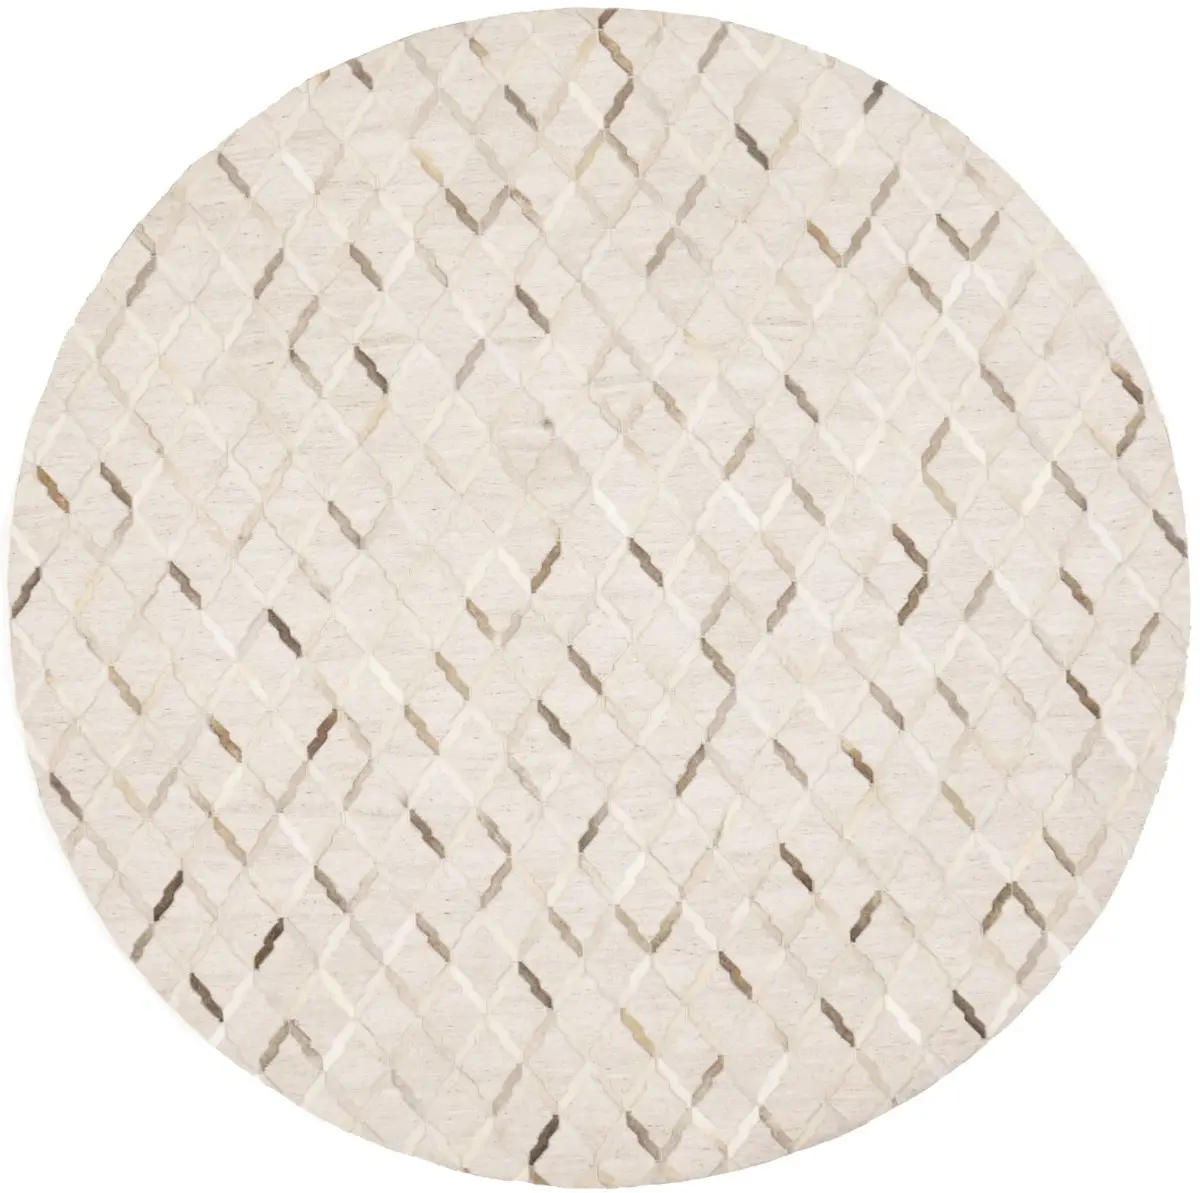 Silver Cowhide 8X8 Modern Leather Round Rug